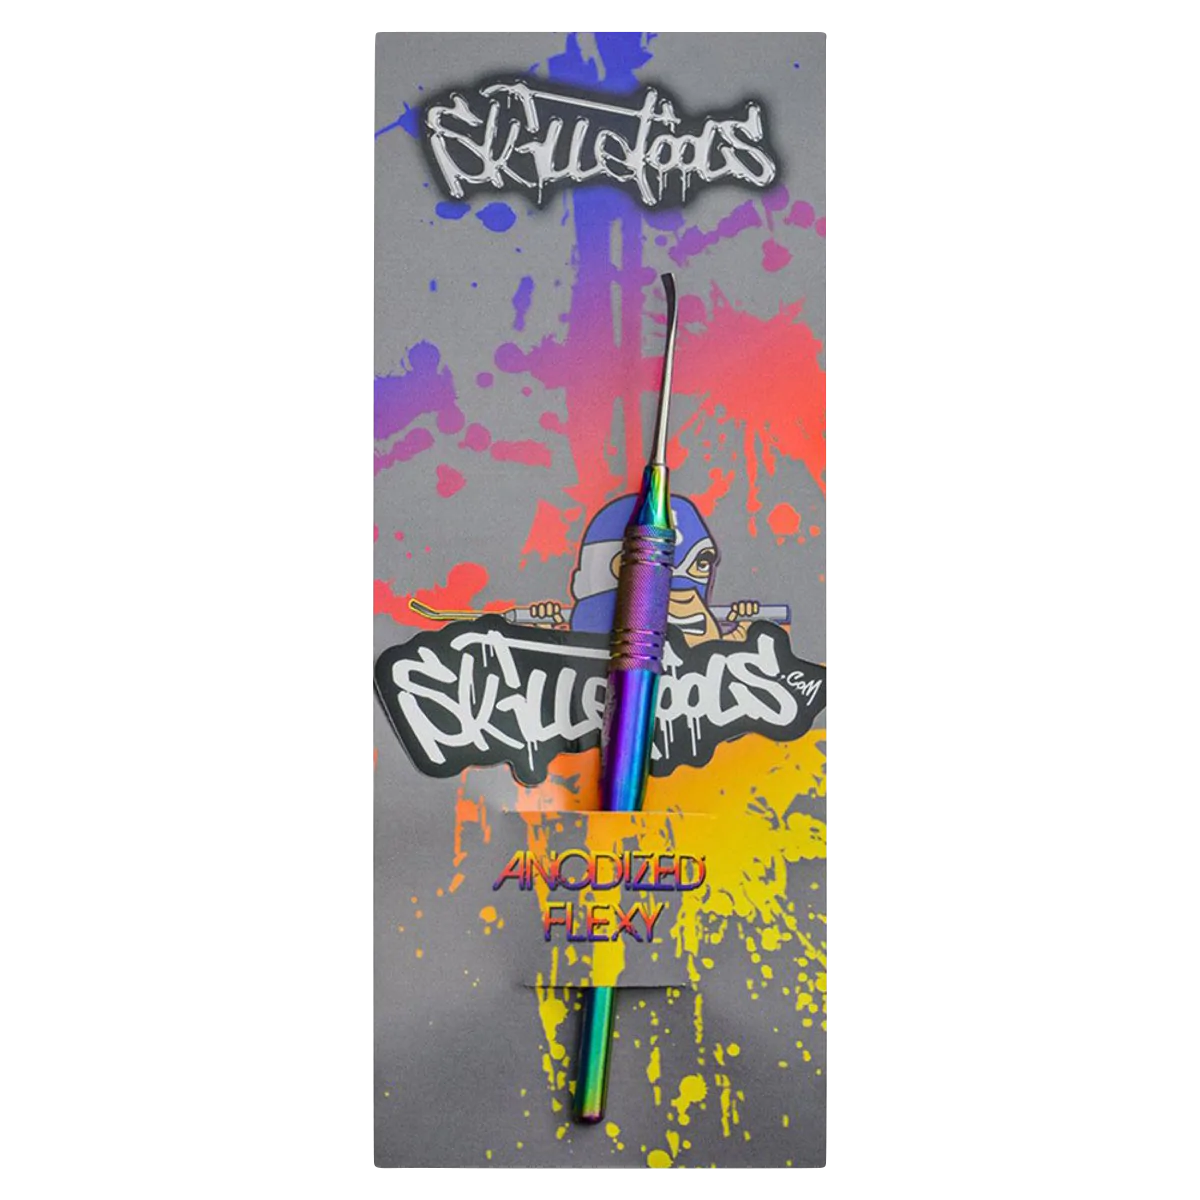 Skilletools Anodized Series Dab Tool with rainbow finish on colorful splattered background